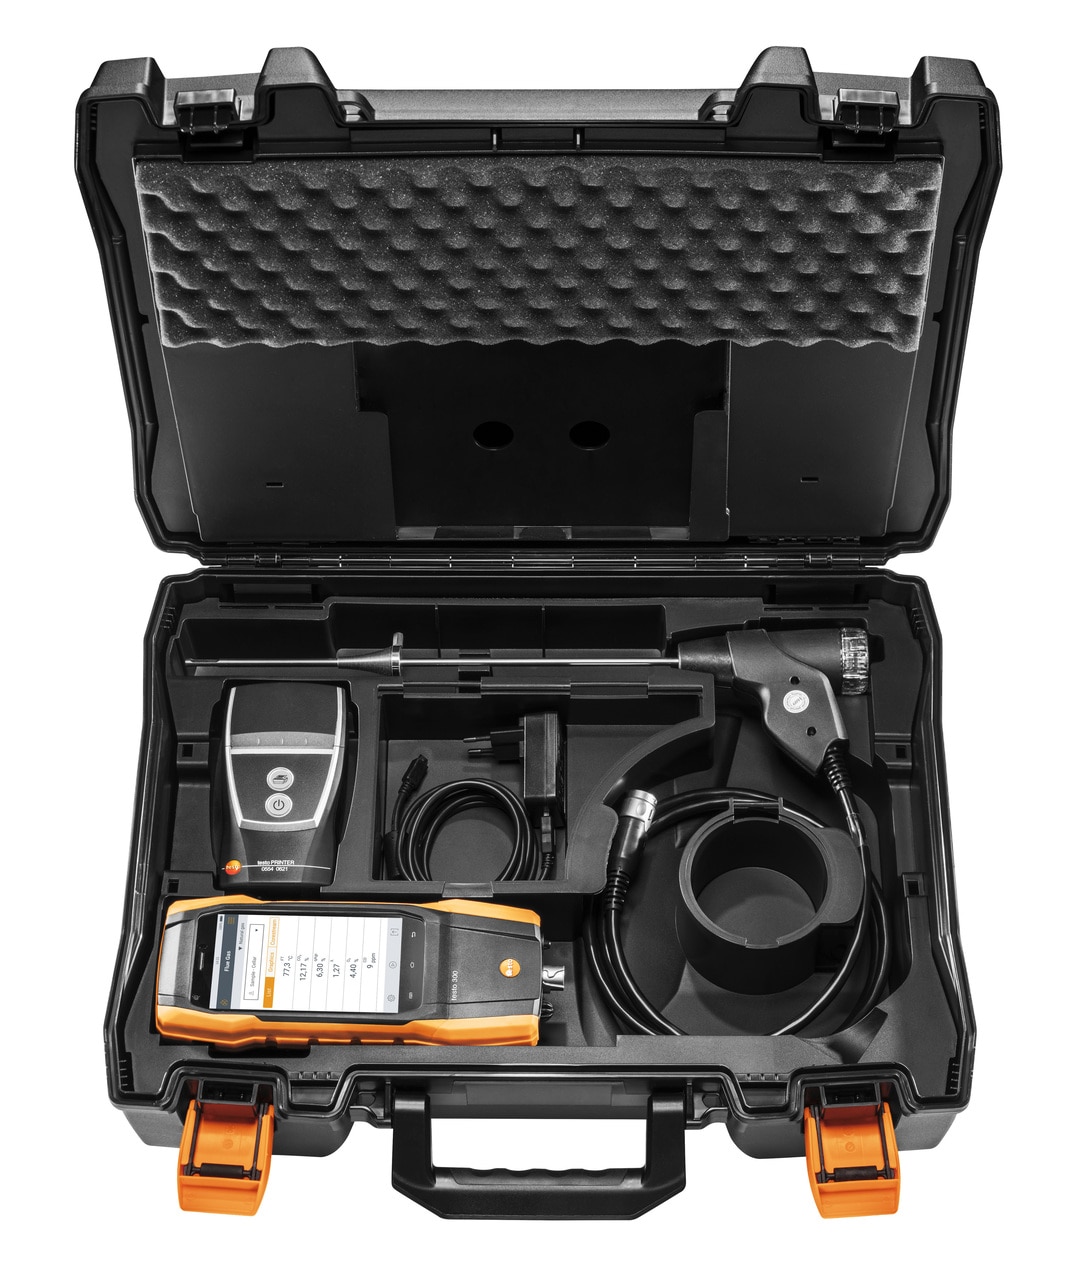 products-testo-300-compact-probe-long-system-case-printer__39197.1564678577.1280.1280.jpg